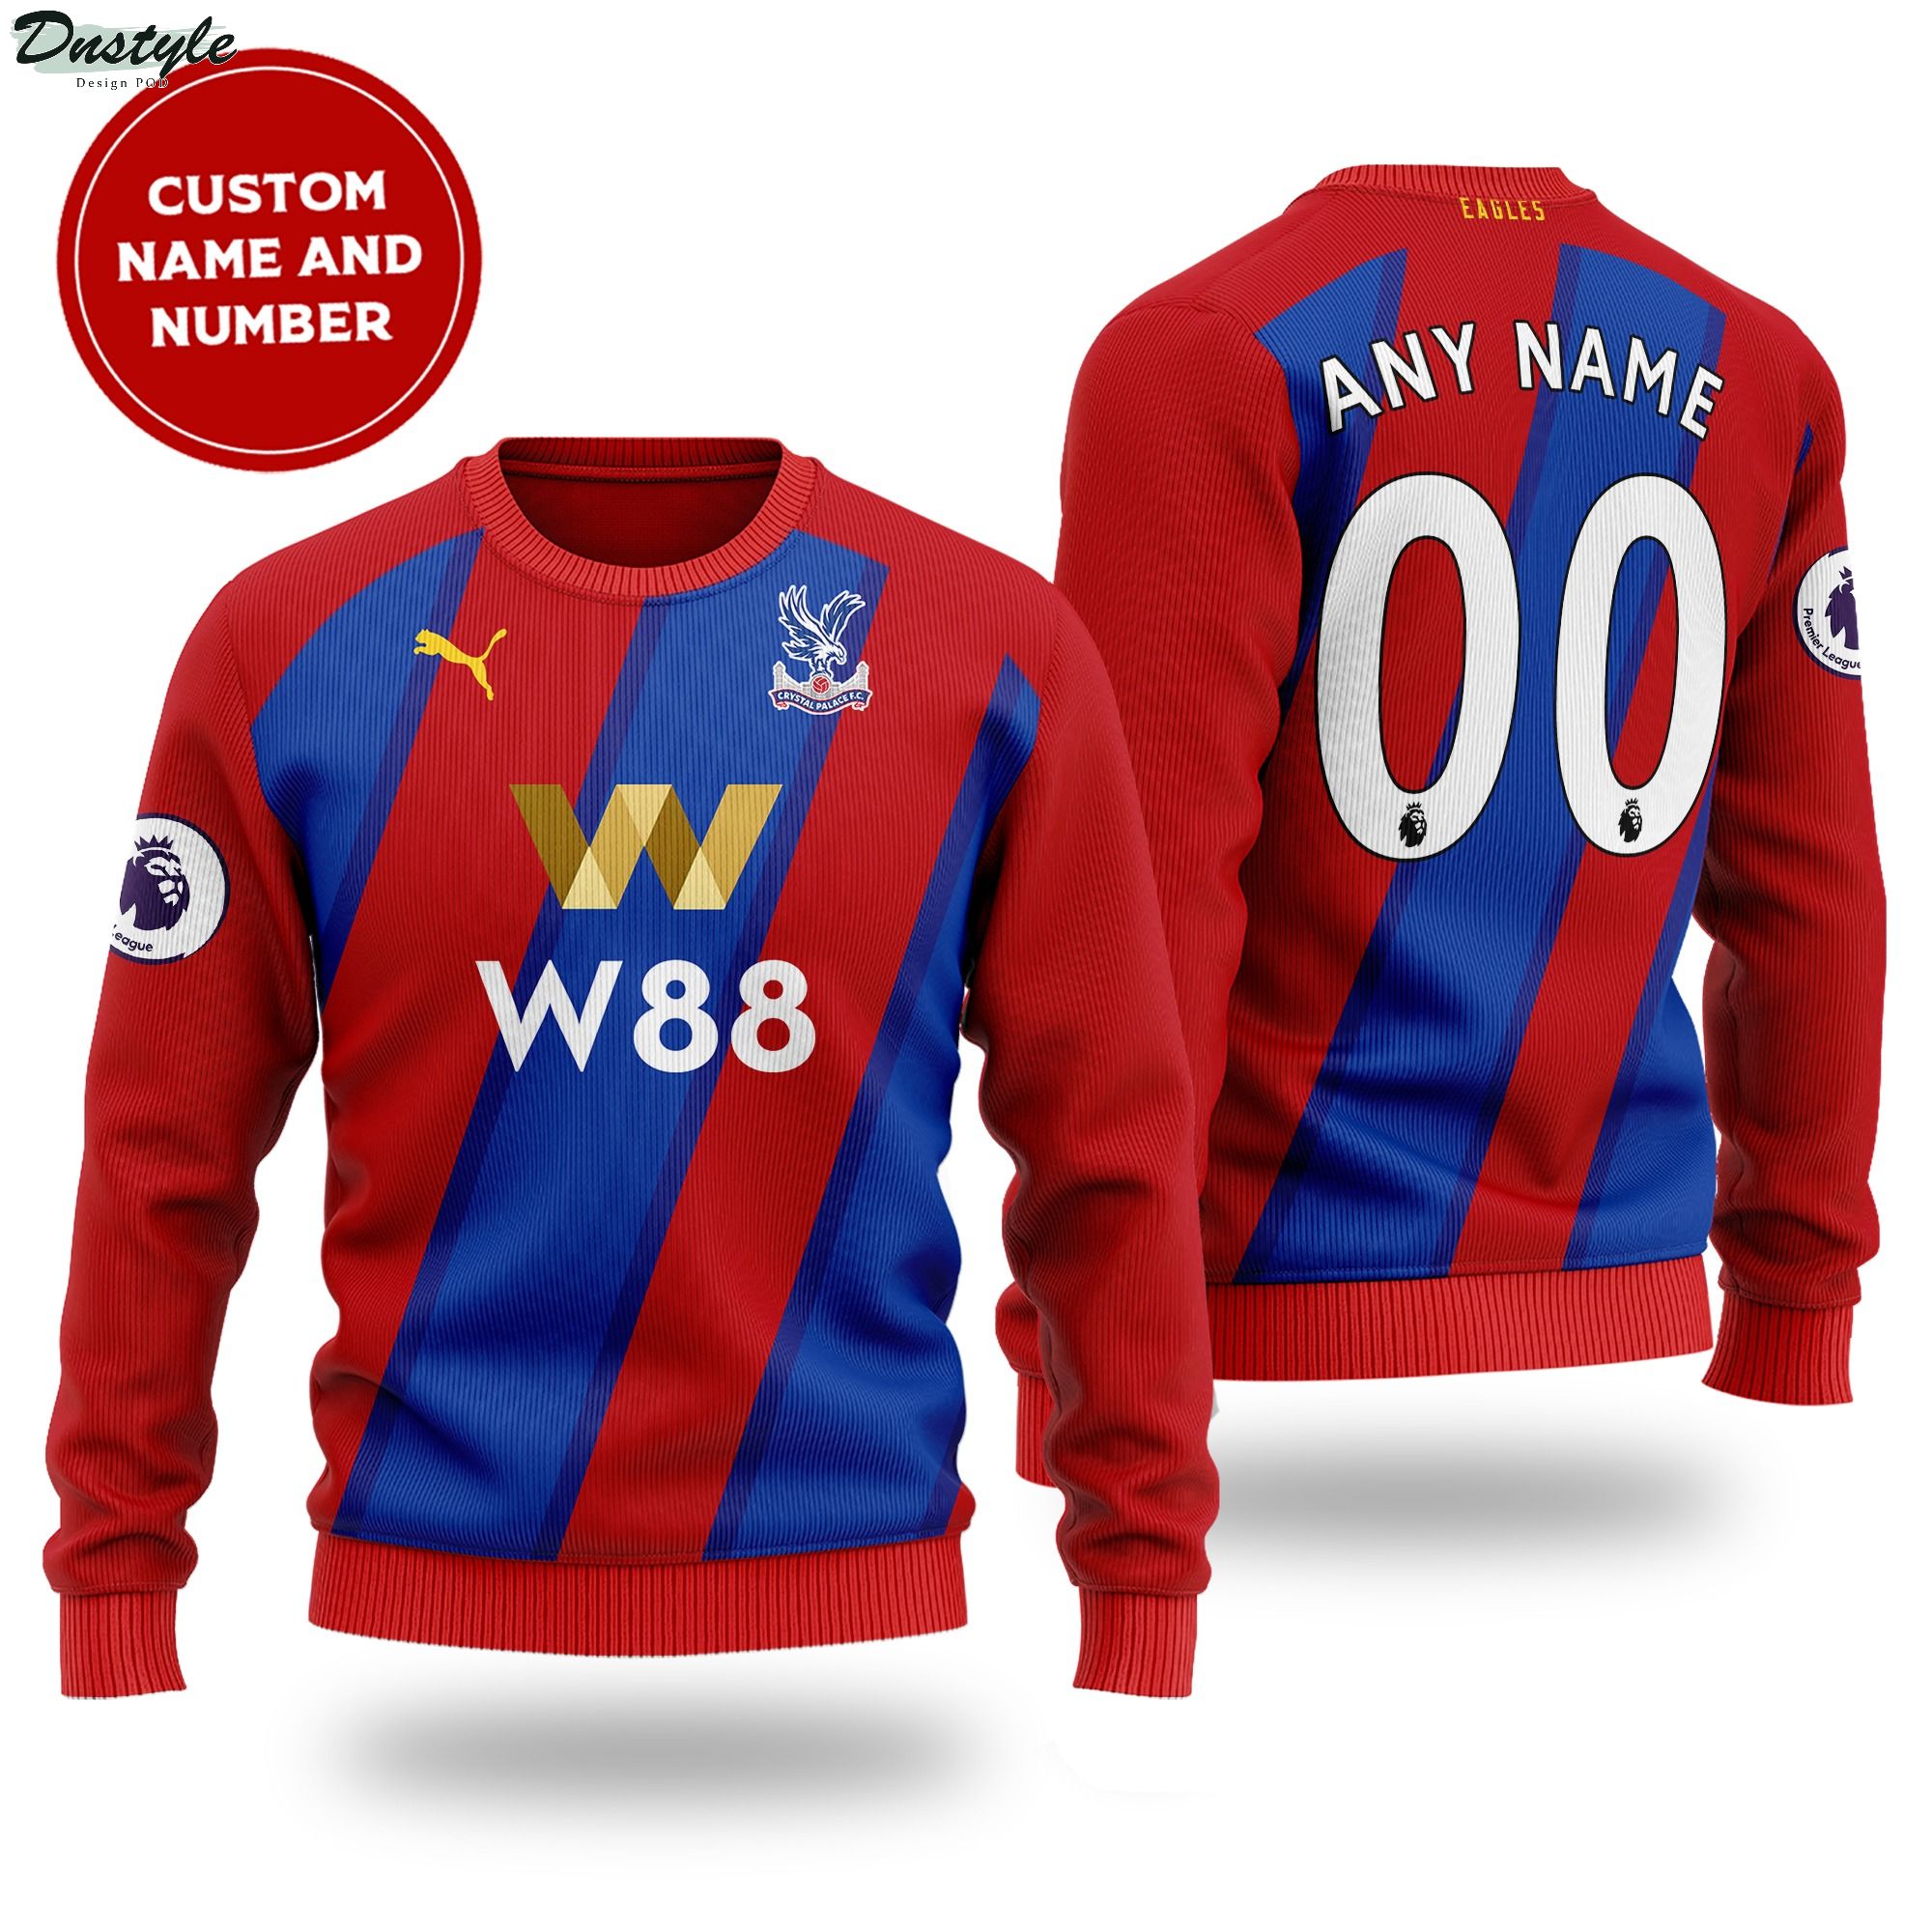 Crystal Palace custom name and number ugly sweater